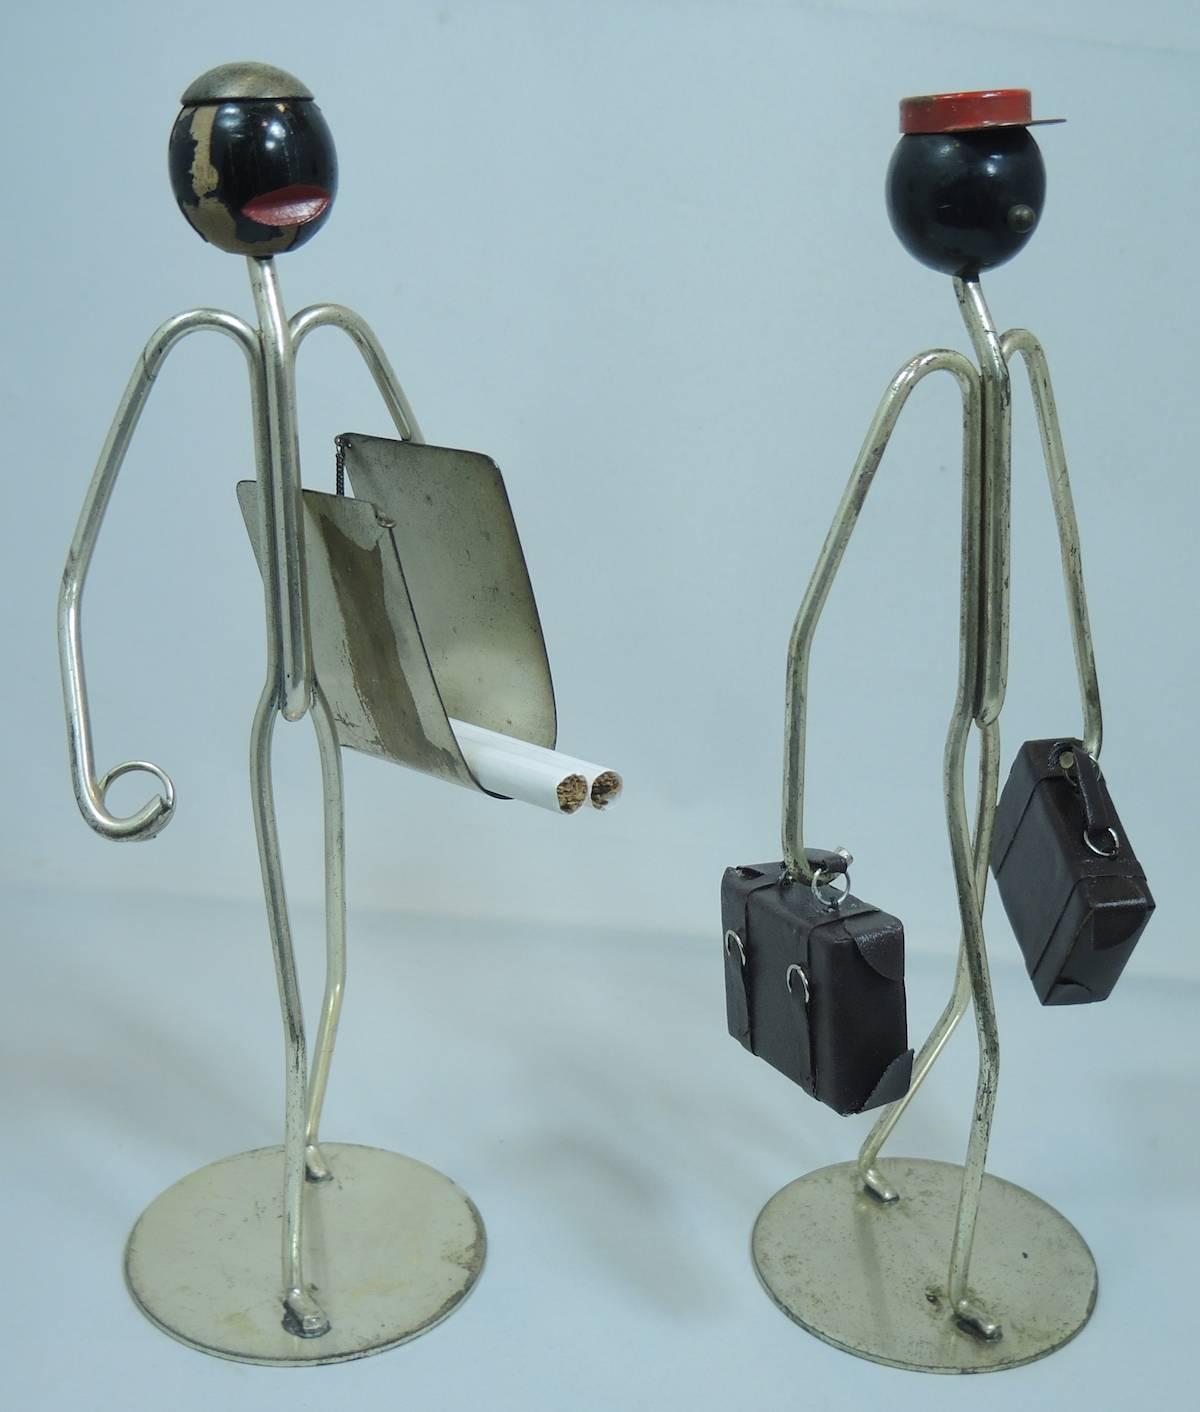 These Art Deco figures are of bellboys and were made in the 1920s by the Napier Jewelry House. They are made of chrome. One of them is holding two suitcases and the other was used to hold cigarettes (now it can business cards). There are signs of